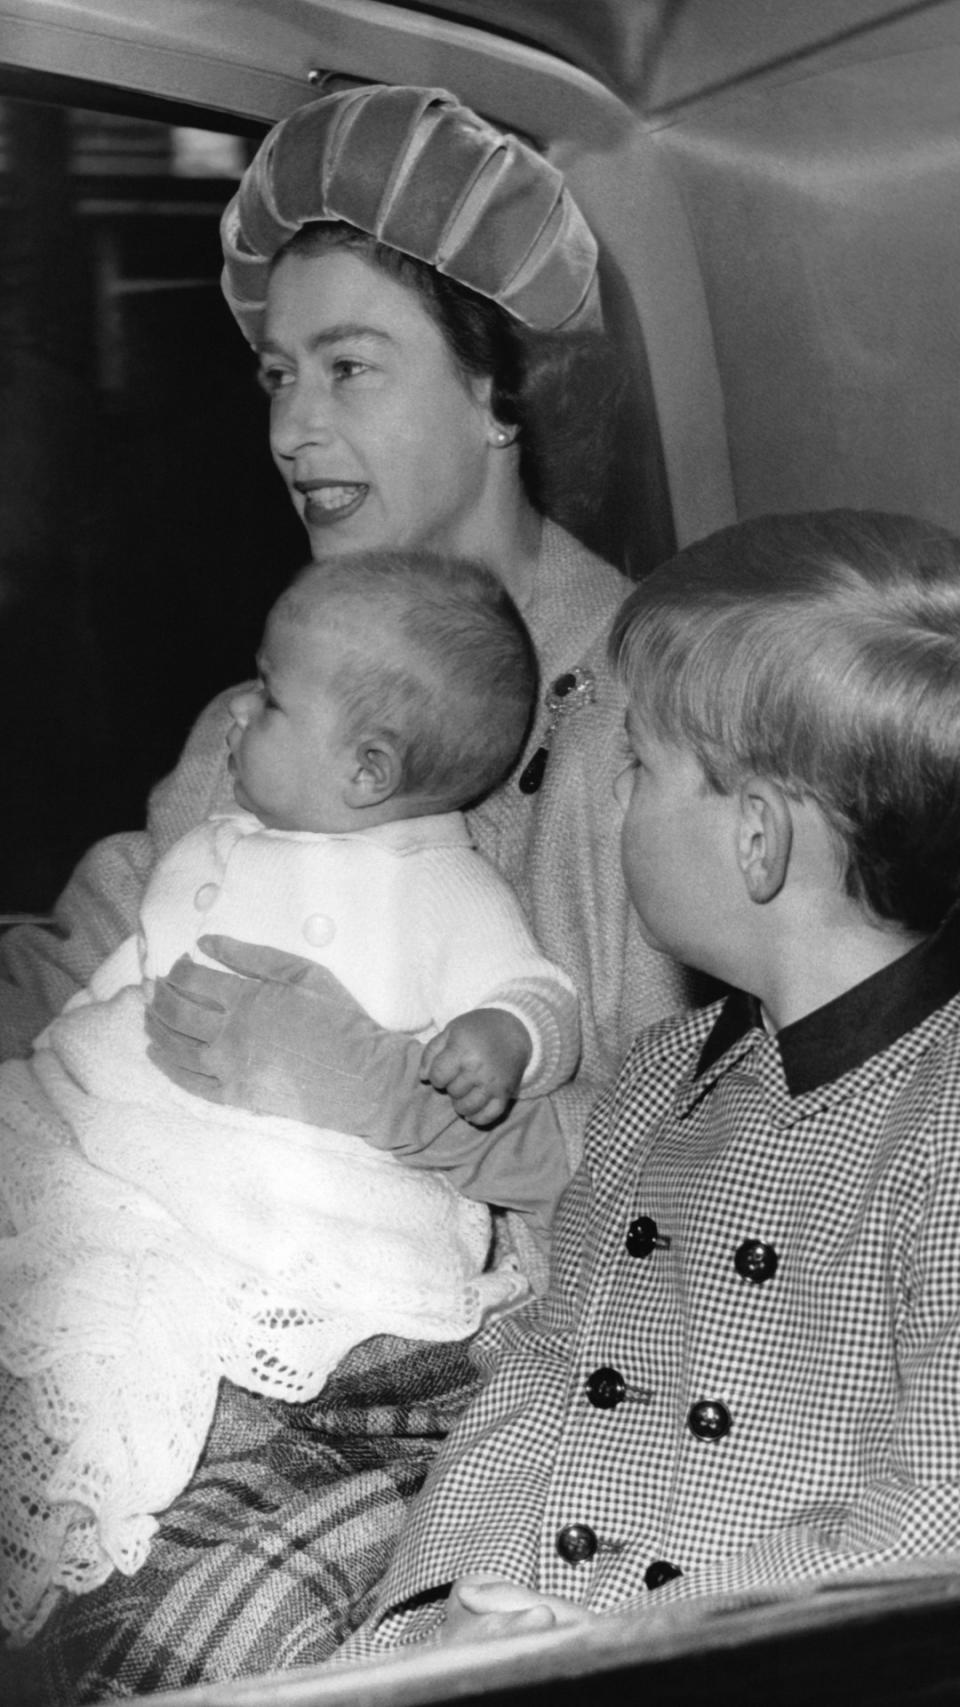 When Prince Philip was in the room for Edward’s birth